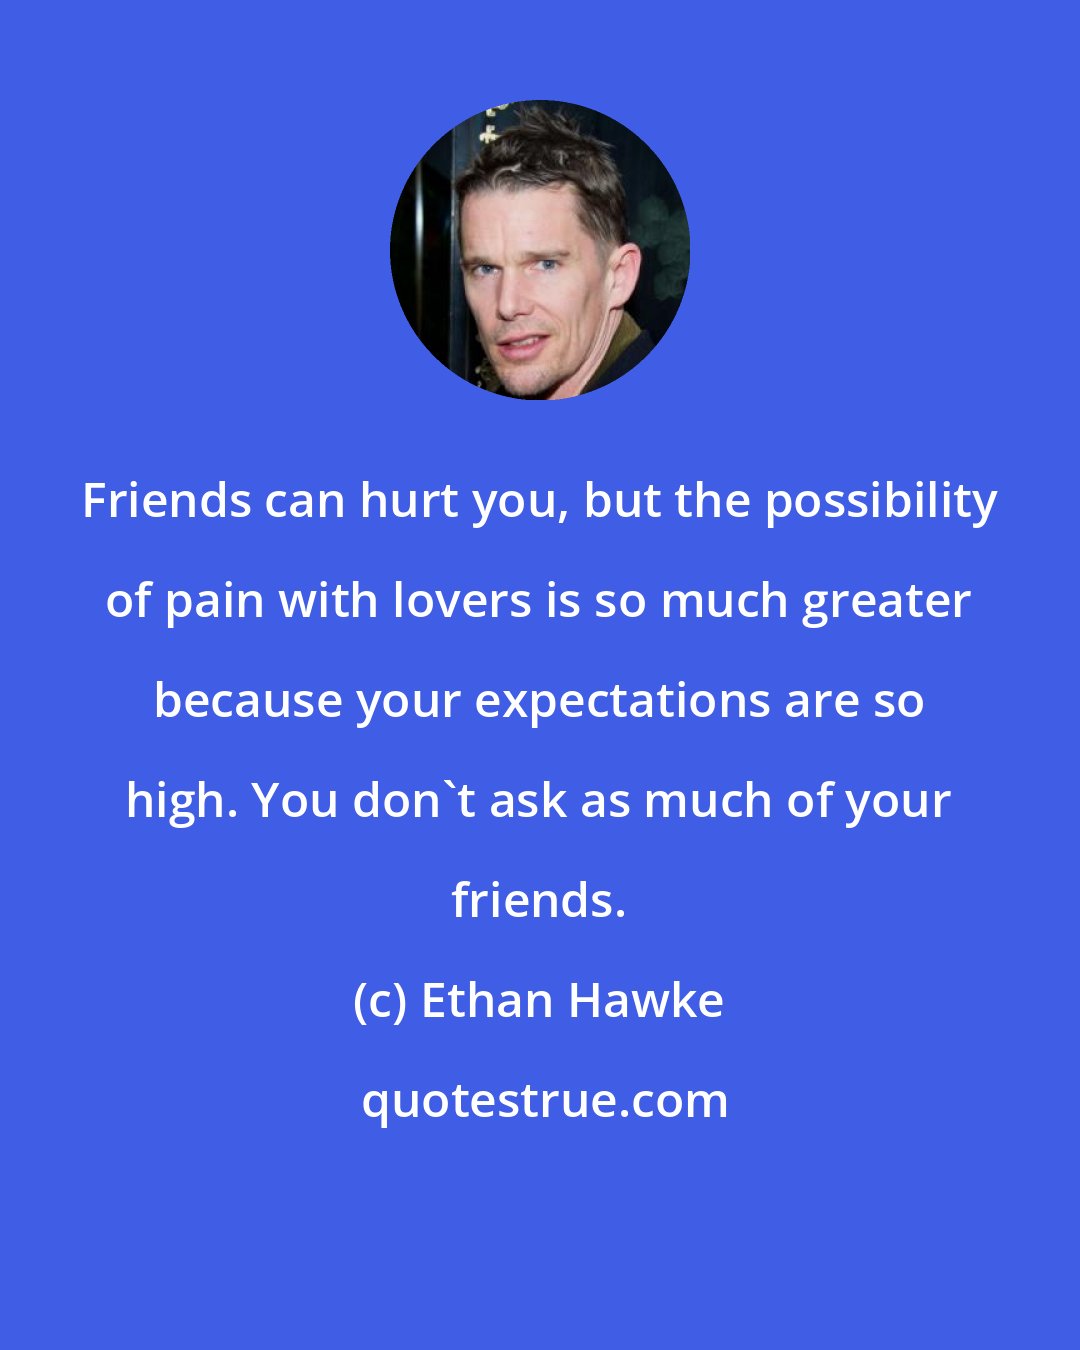 Ethan Hawke: Friends can hurt you, but the possibility of pain with lovers is so much greater because your expectations are so high. You don't ask as much of your friends.